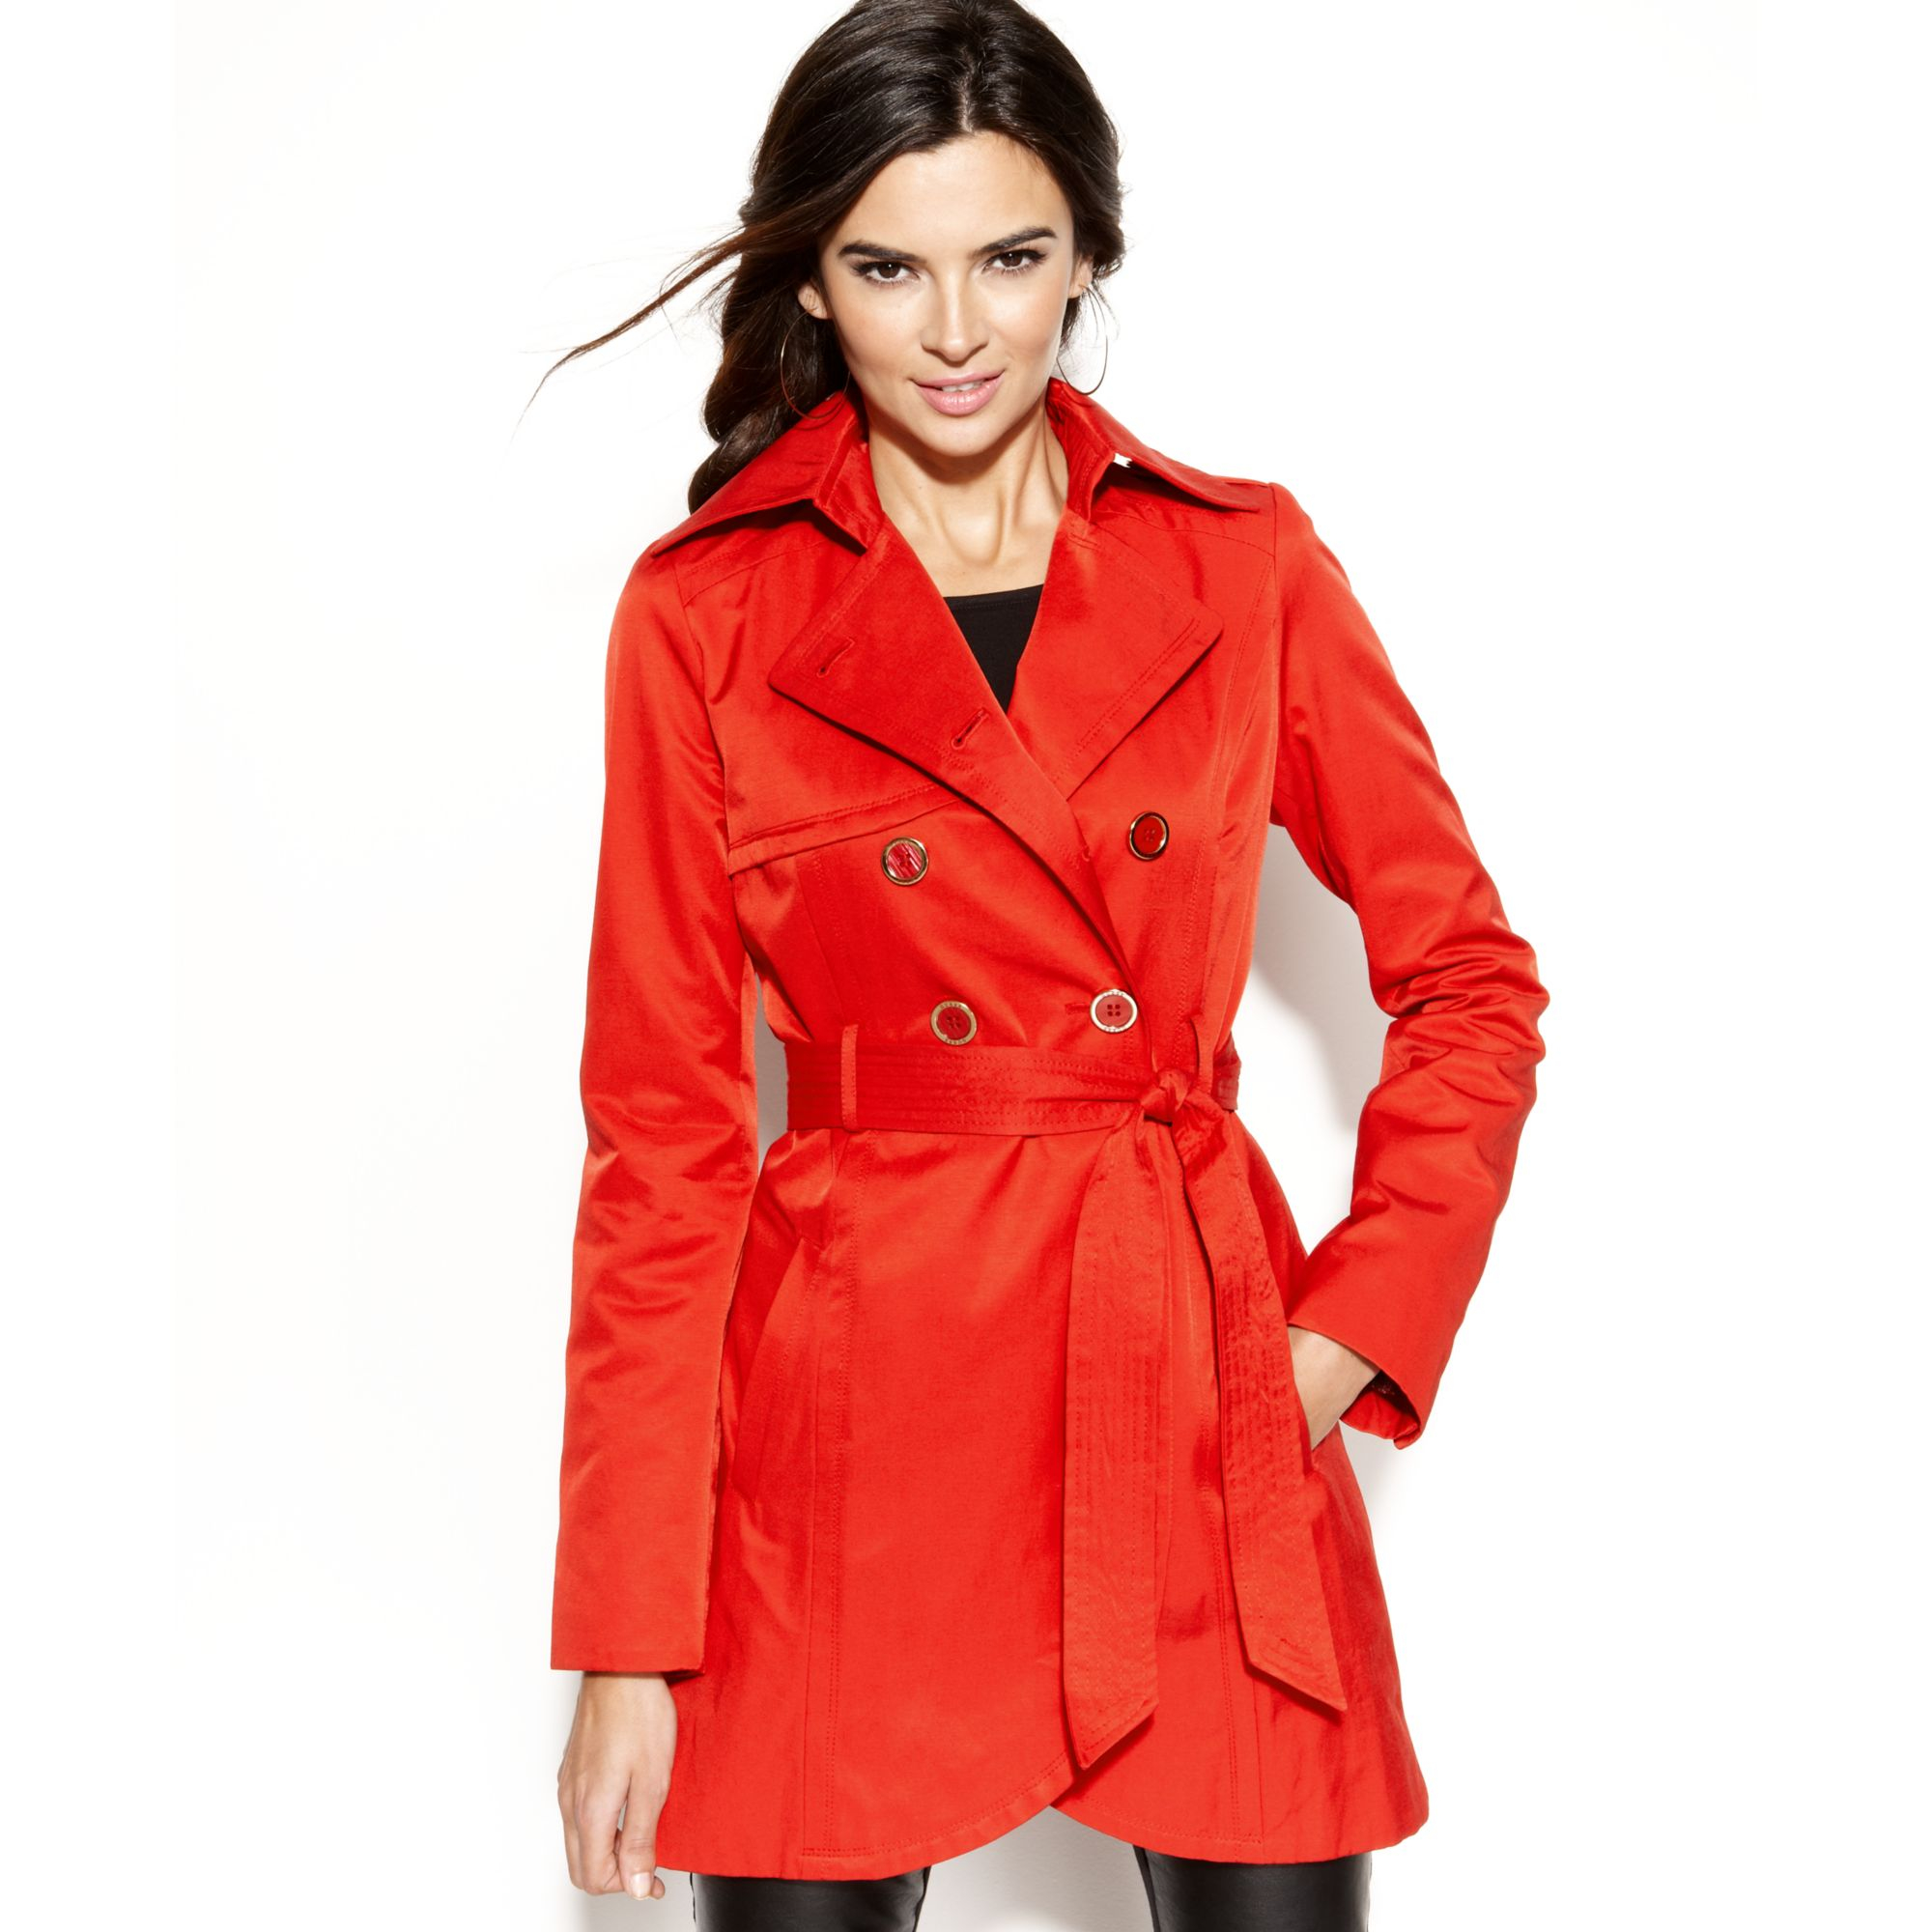 Lyst - Guess Curved-hem Trench Coat in Red